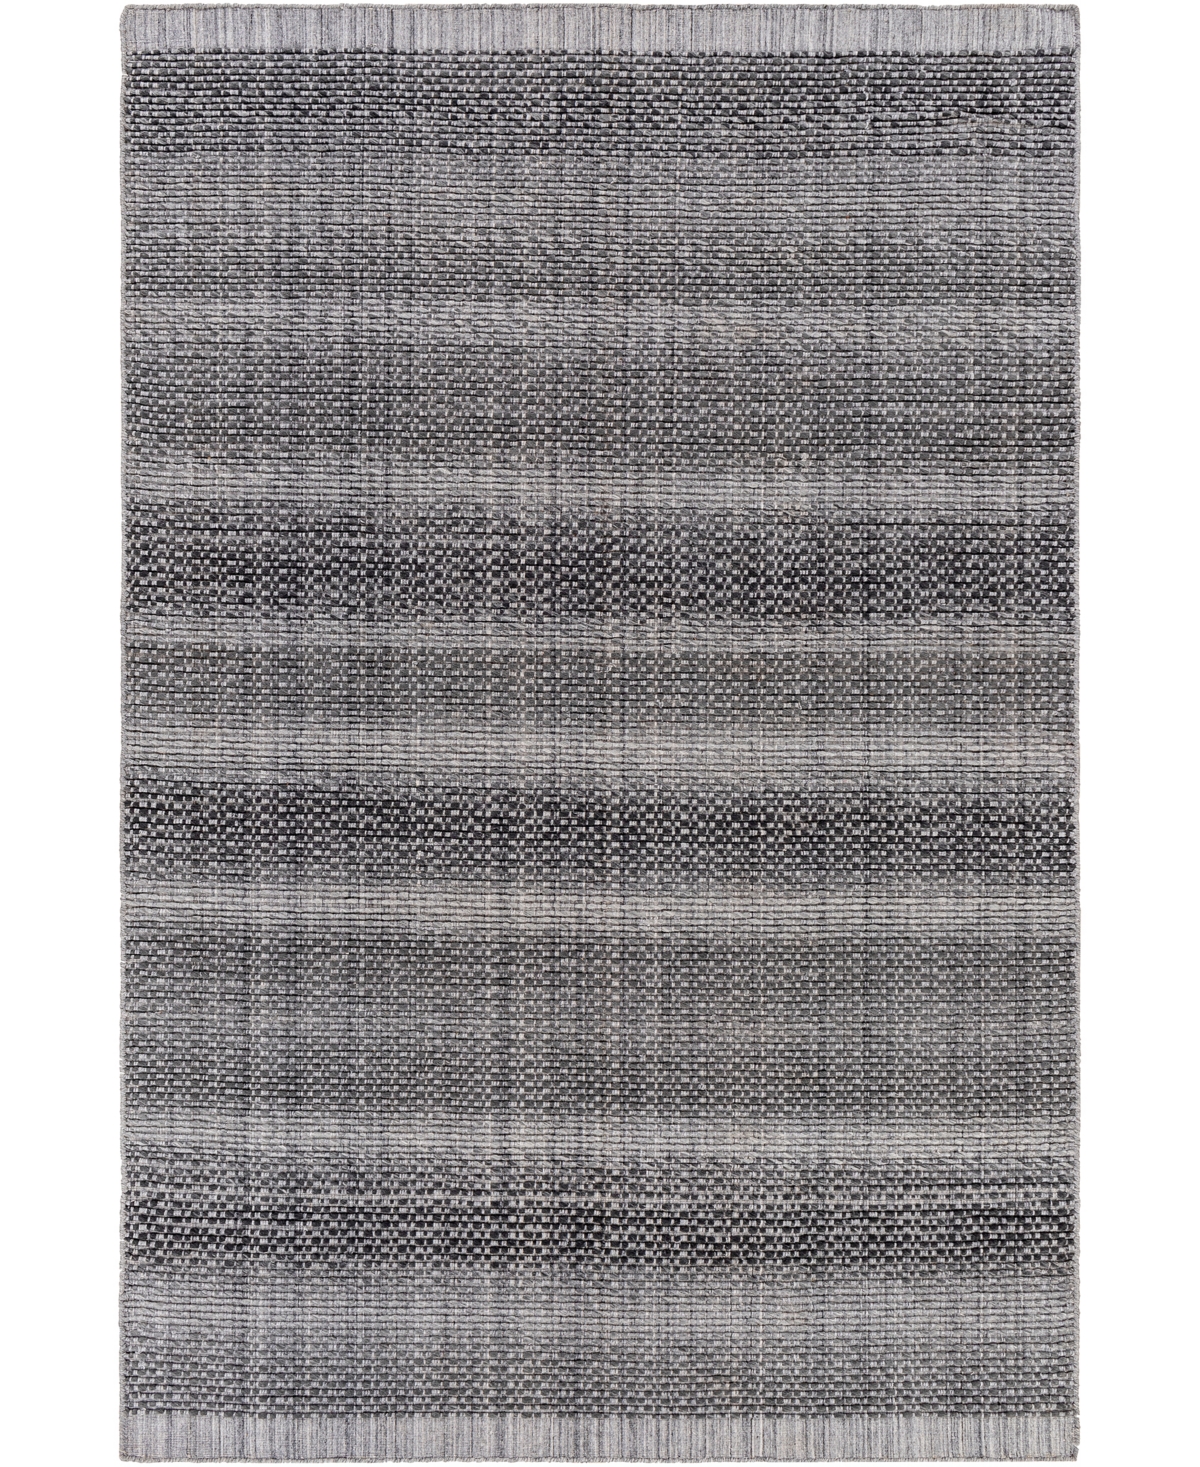 Surya Sycamore Syc-2301 6in x 9' Outdoor Area Rug - Charcoal